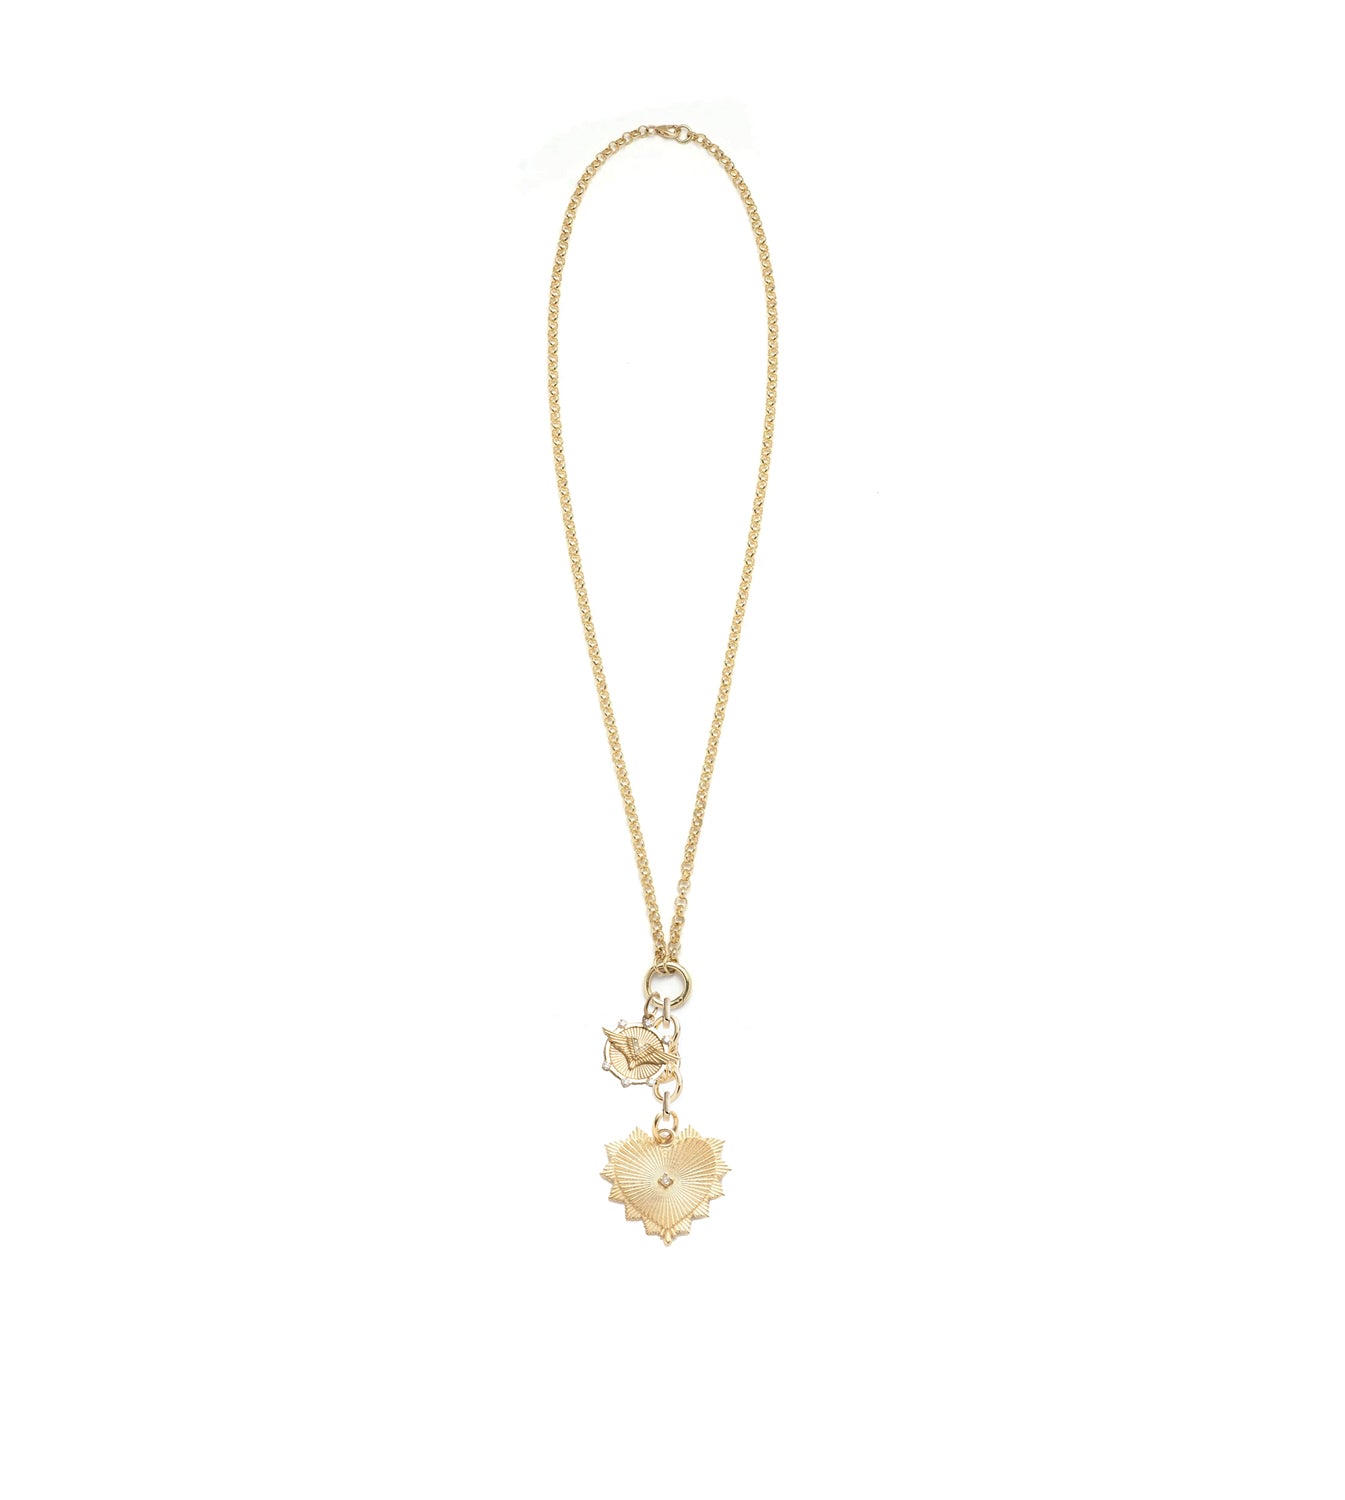 Medium Radiating Heart & Passion : Medium Open Belcher with Small Knot Extension Chain Necklace